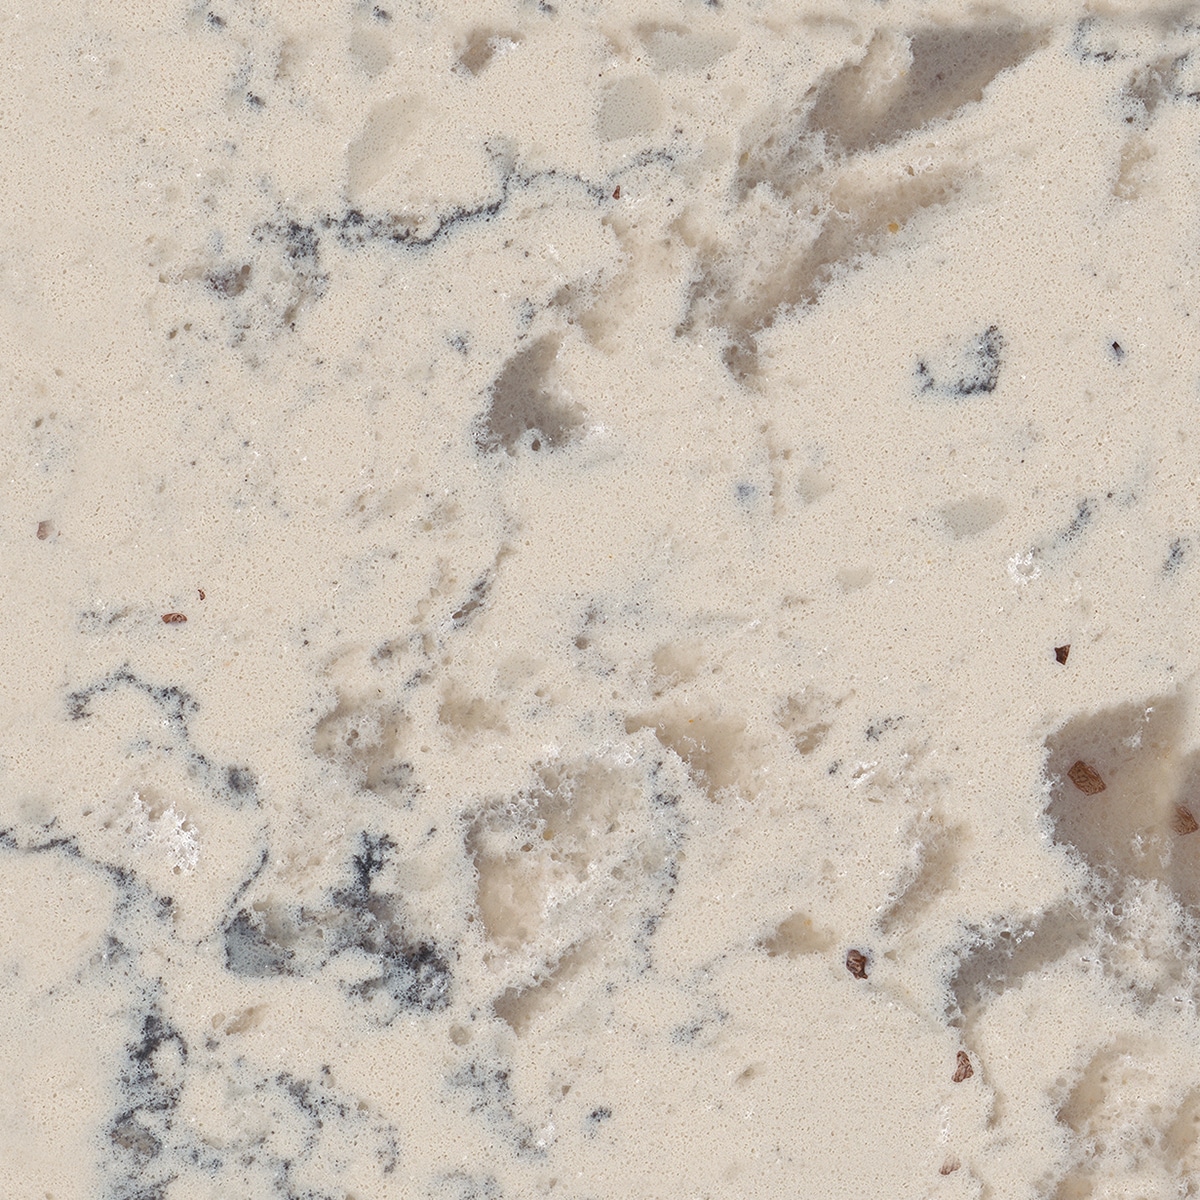 allen + roth Effervesce Quartz Off-white Kitchen Countertop SAMPLE (4-in x  4-in) in the Kitchen Countertop Samples department at